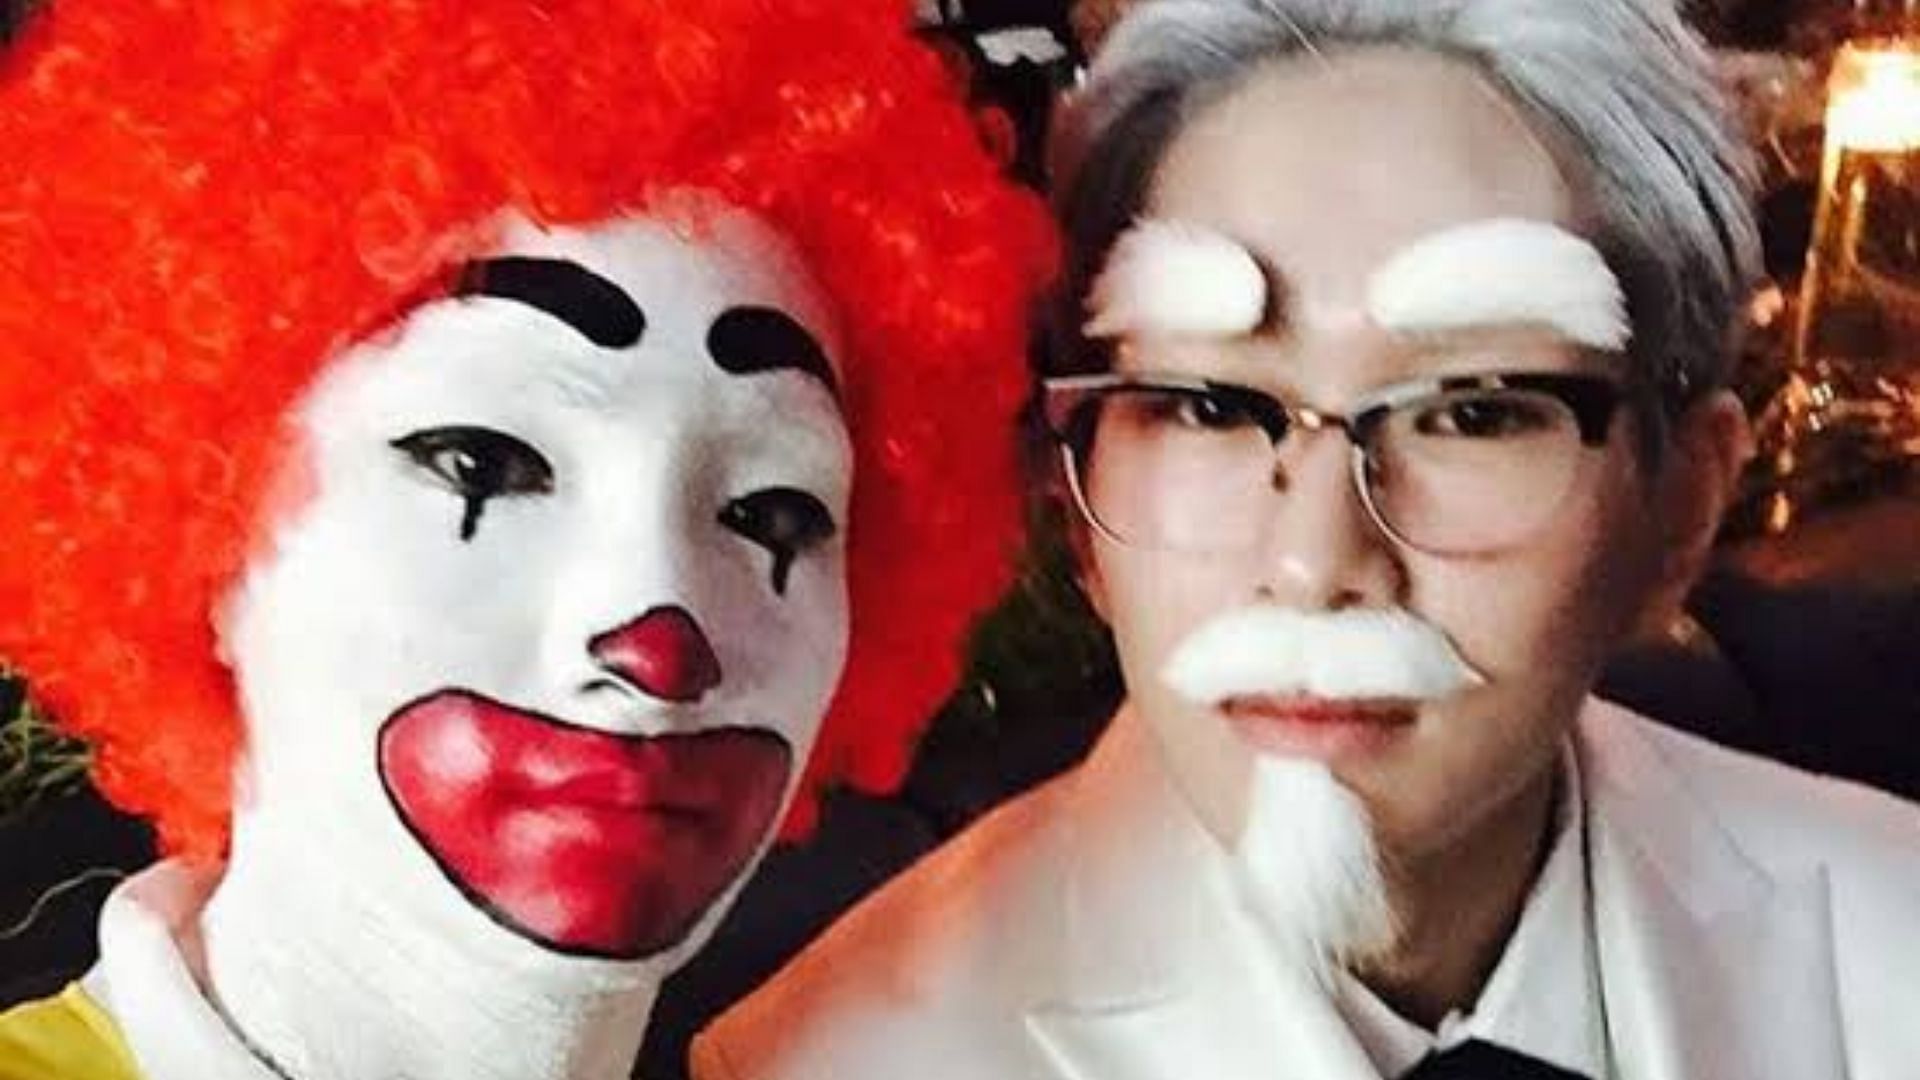 Onew and Key at SM Entertainment&#039;s 2015 Halloween party (Image via Twitter/@IDreamofSHINee)